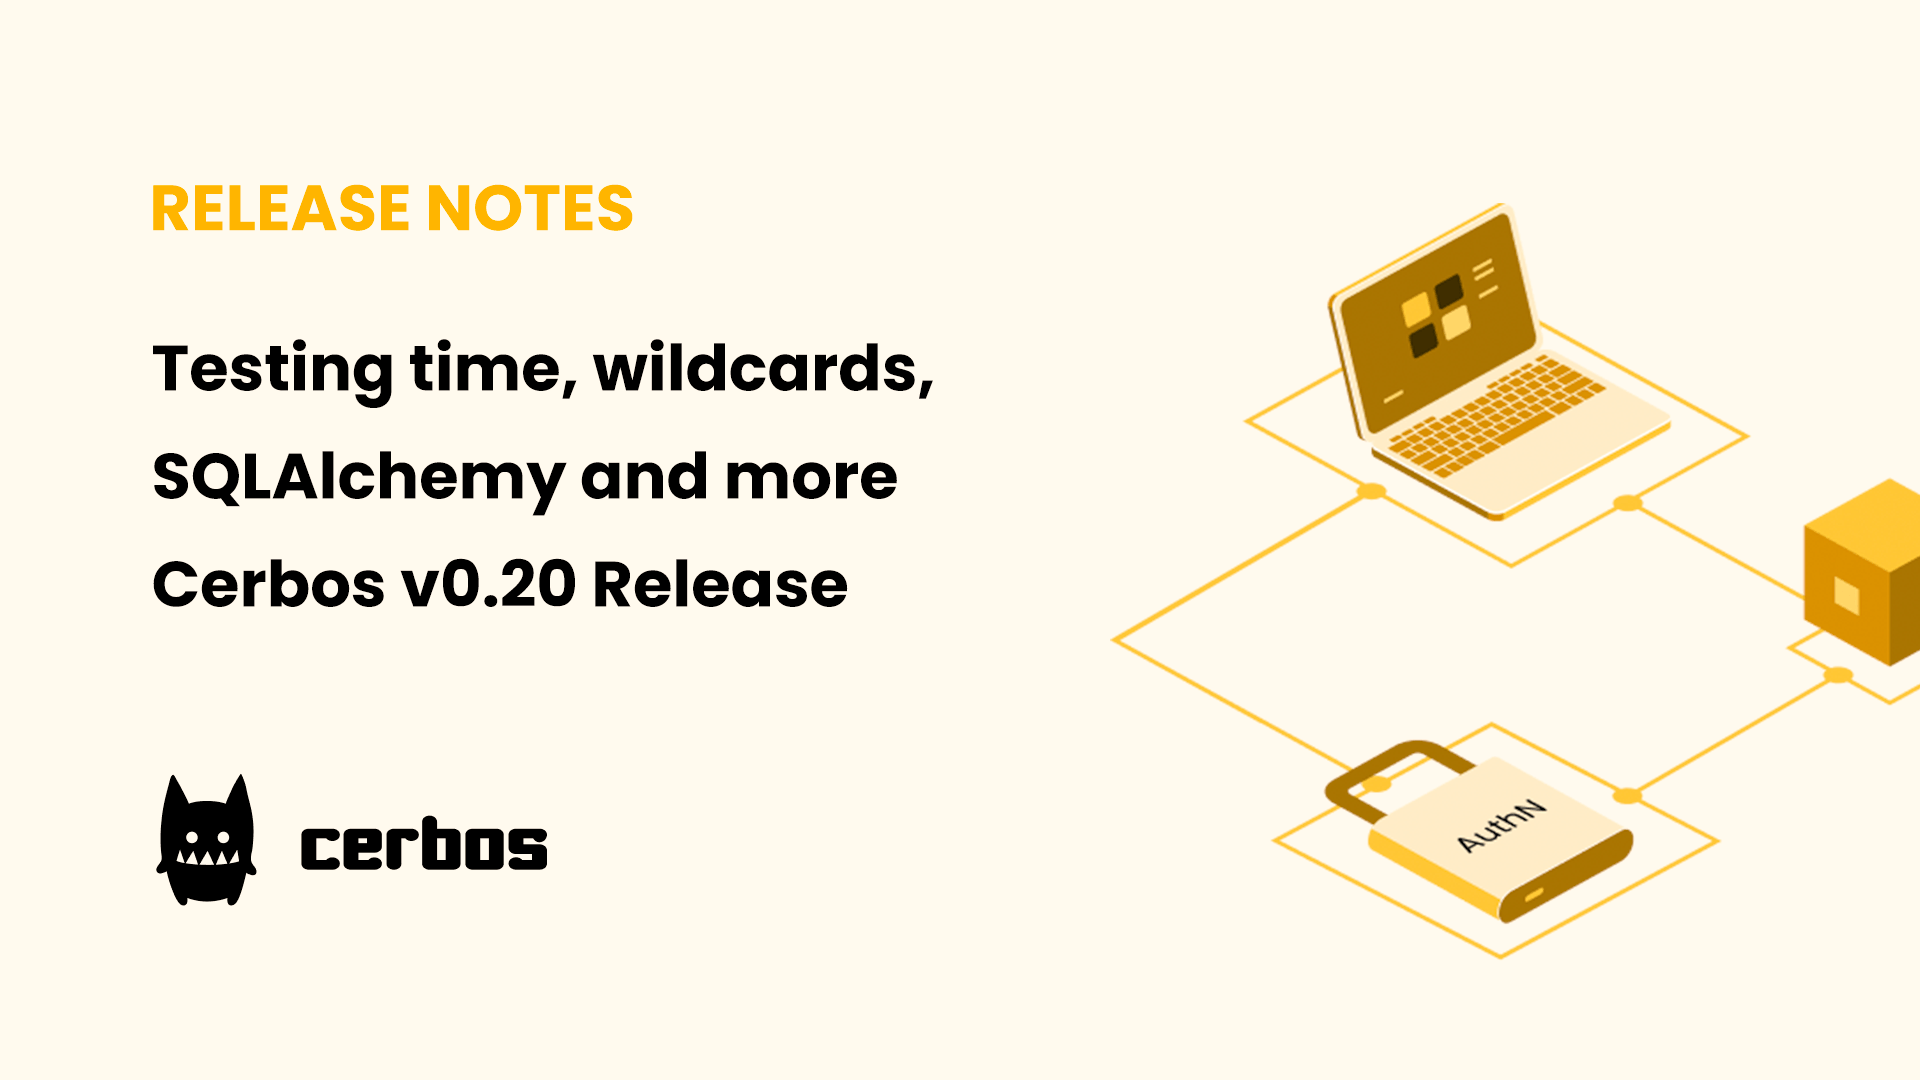 Testing time, wildcards, SQLAlchemy and more - Cerbos v0.20 Release